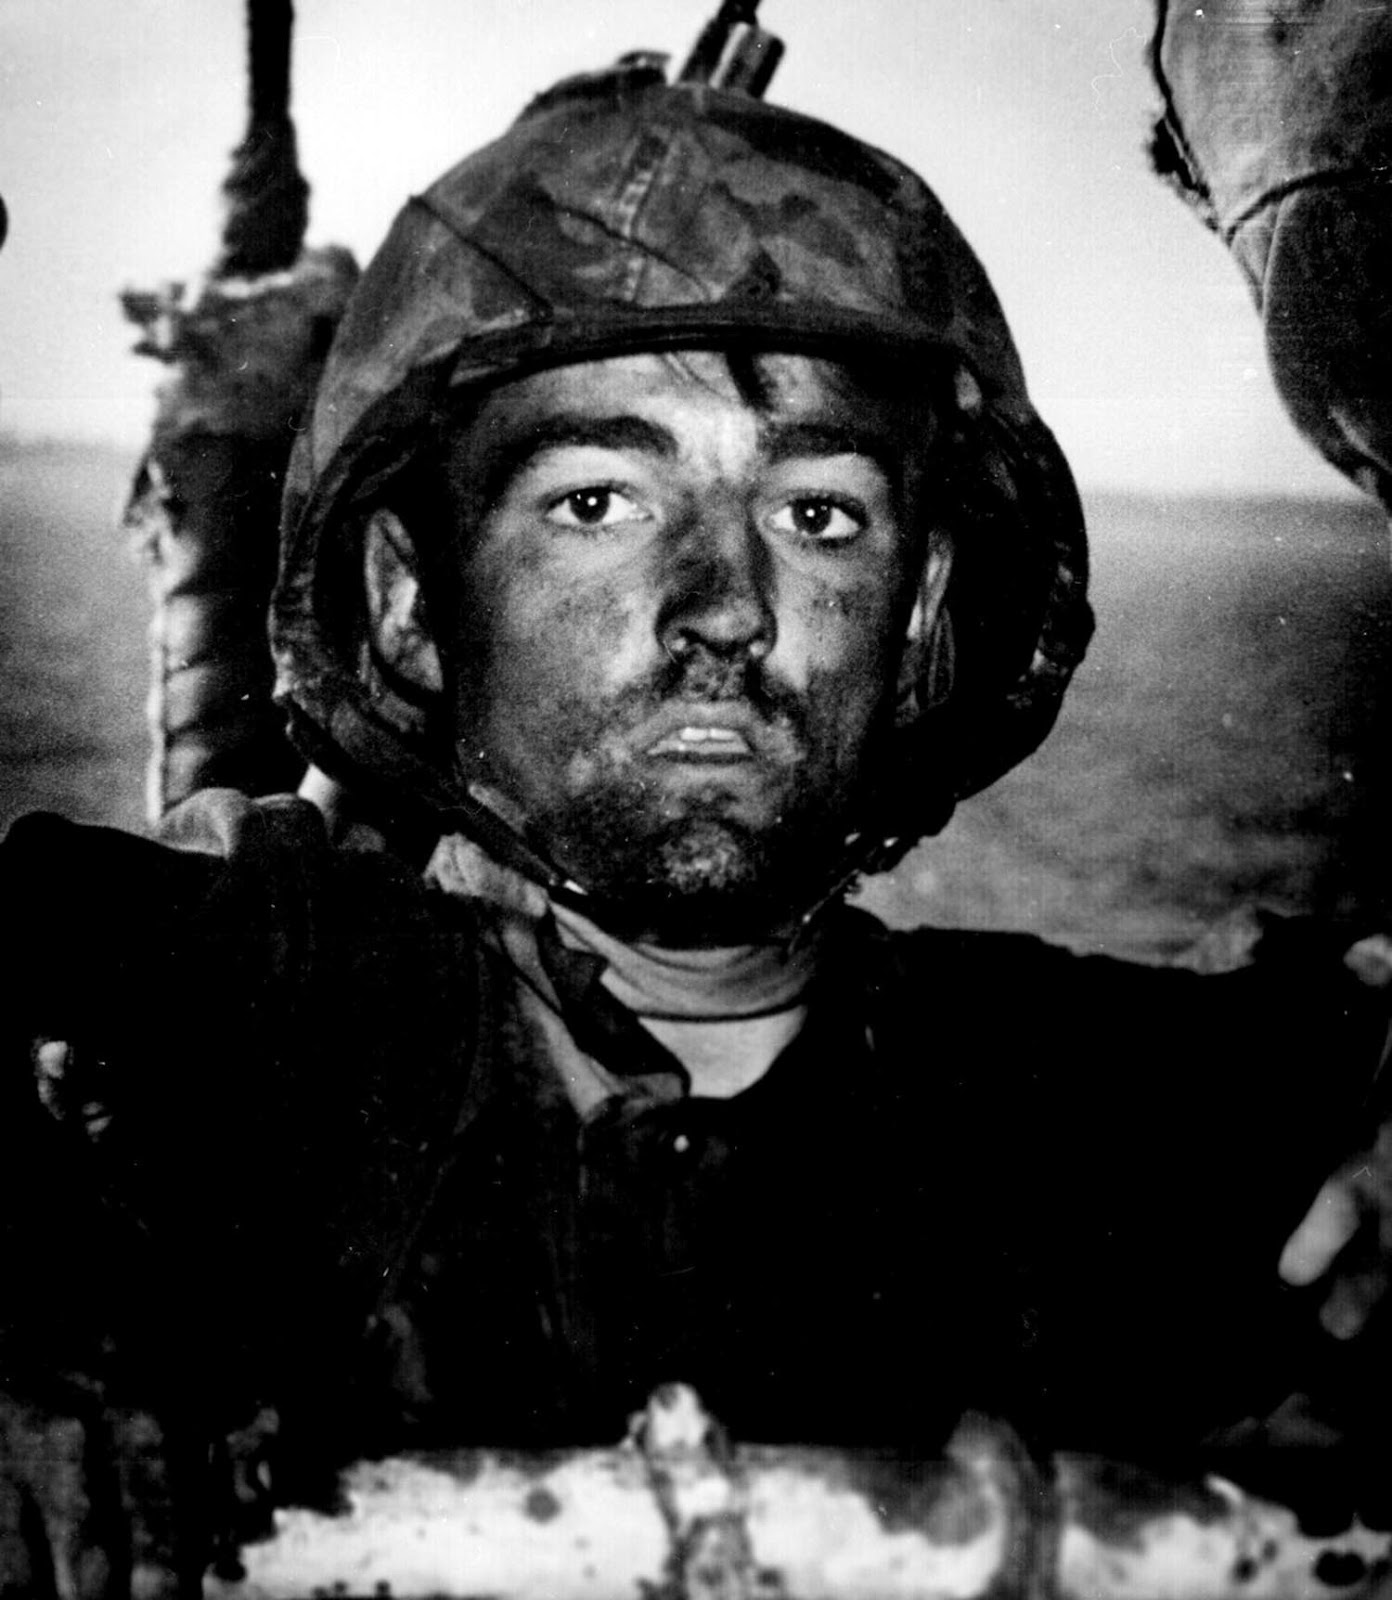 A U.S. Marine exhibits the thousand-yard stare after two days of constant fighting in the Battle of Eniwetok, 1944